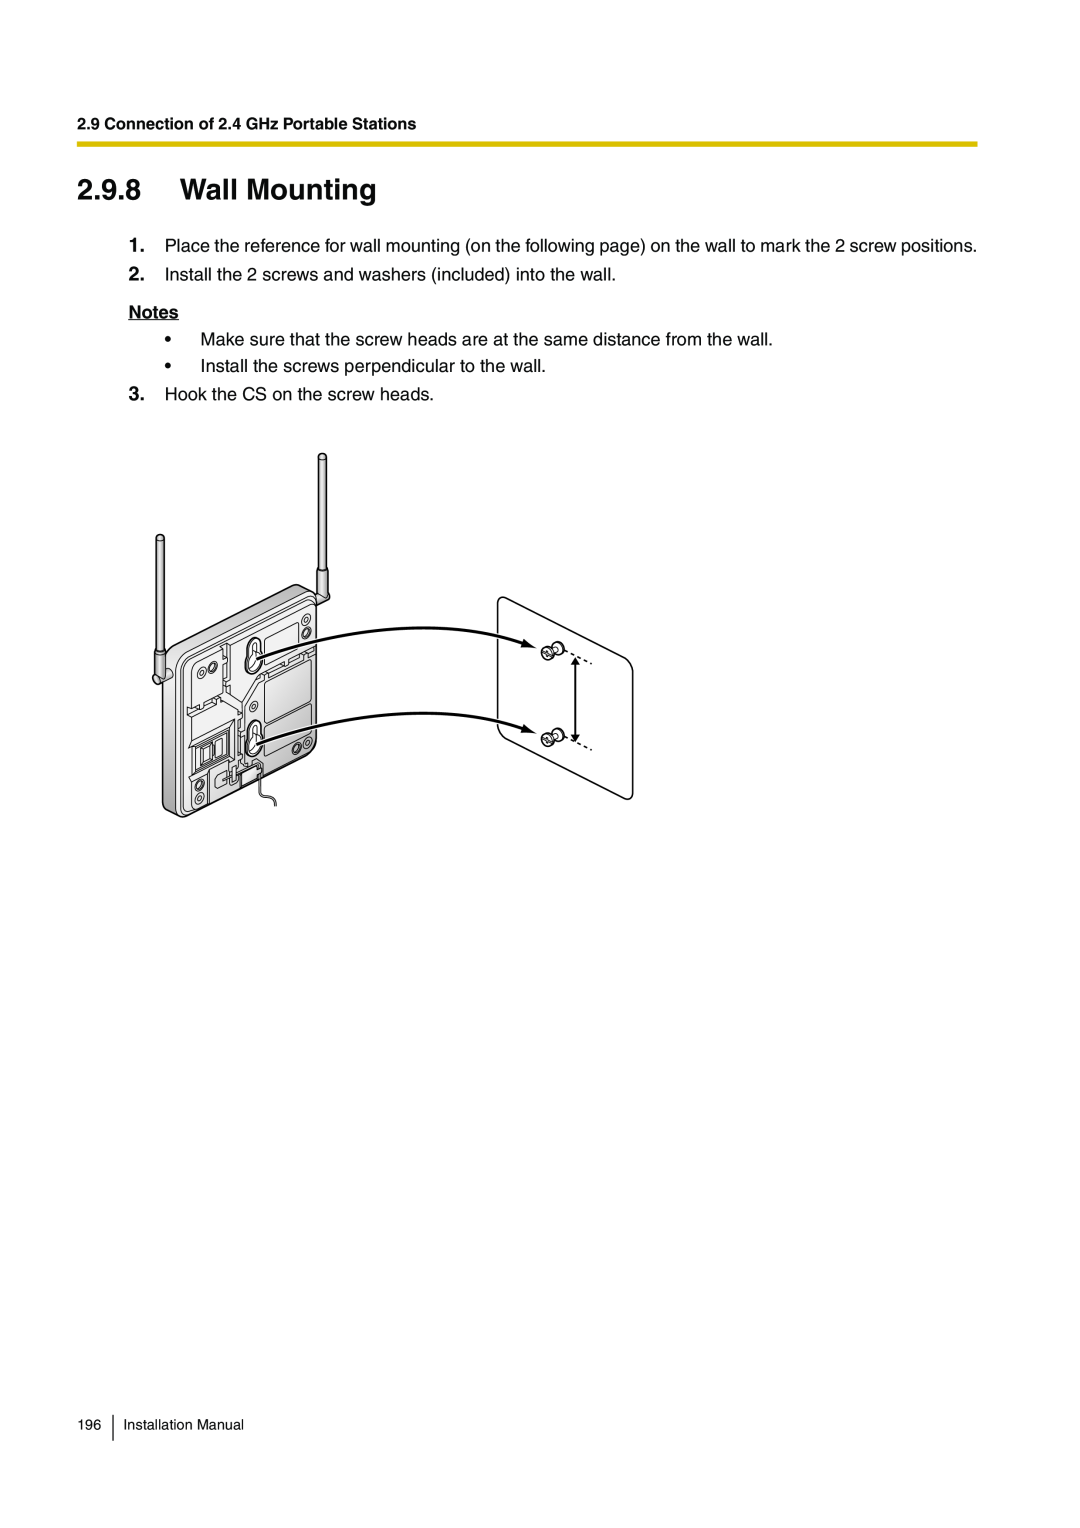 Panasonic KX-TDA100 installation manual Wall Mounting, Connection of 2.4 GHz Portable Stations, Installation Manual 